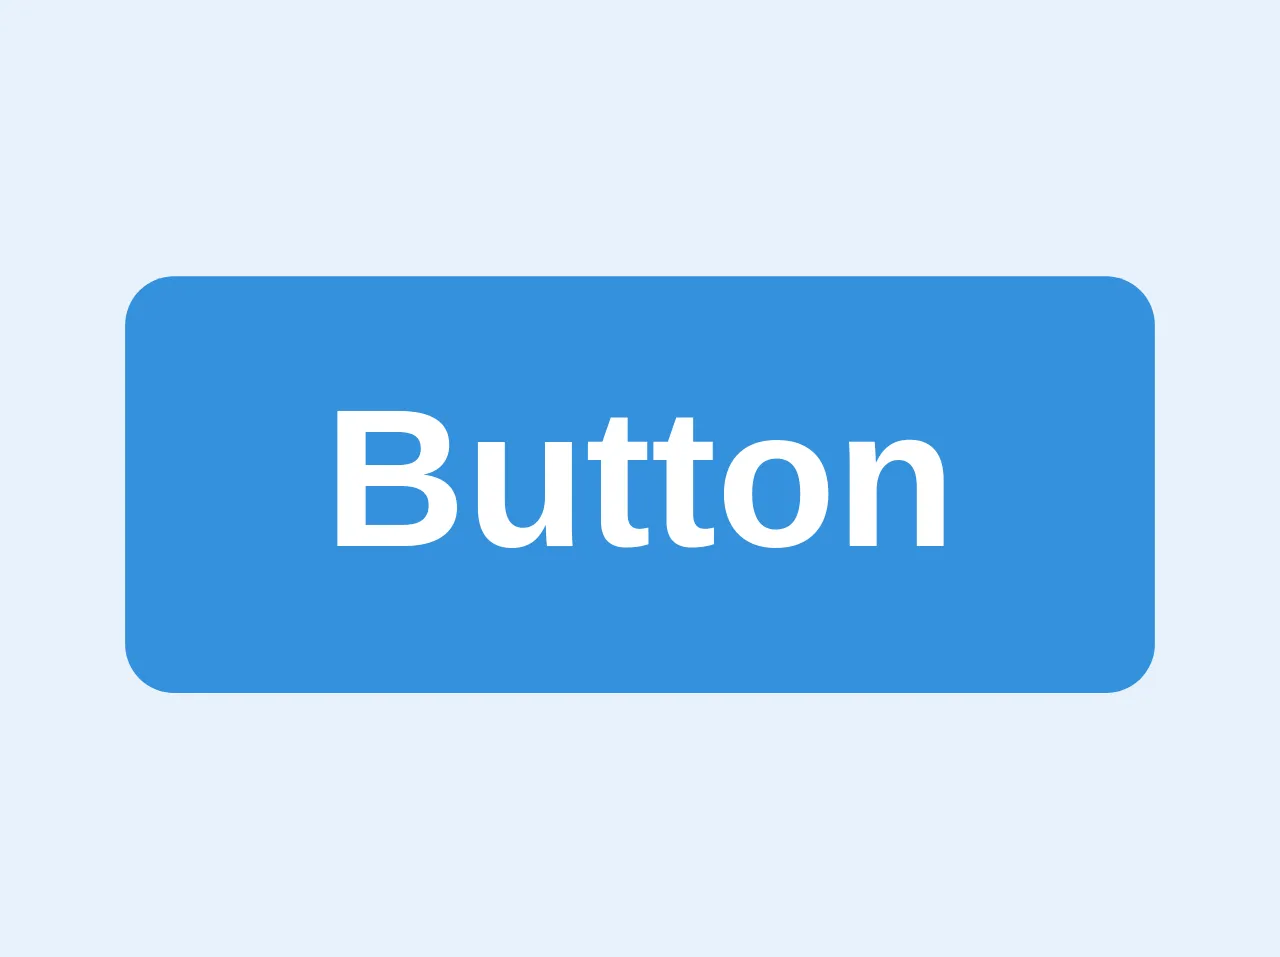 Simple button